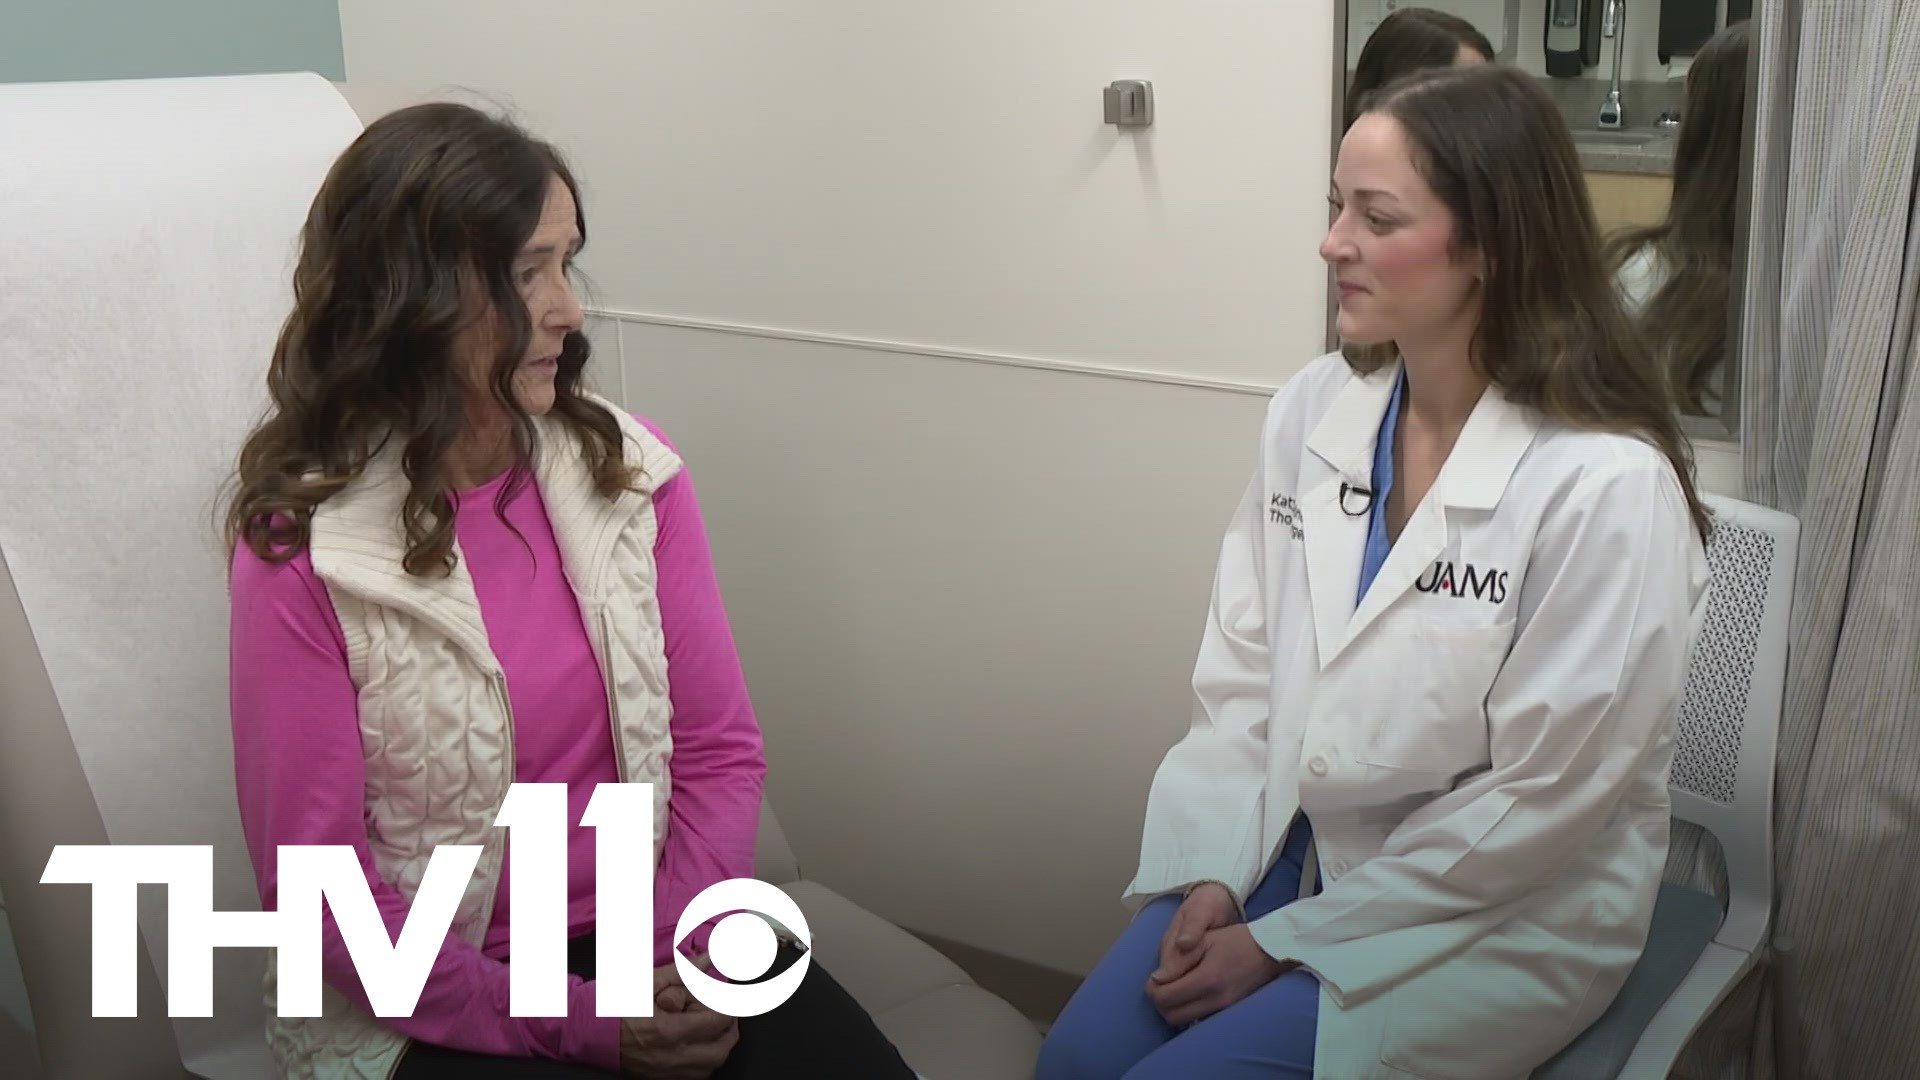 Early detection of any cancer can have a huge impact on the outcome— we spoke with an Arkansas woman who credits one simple test with saving her life.